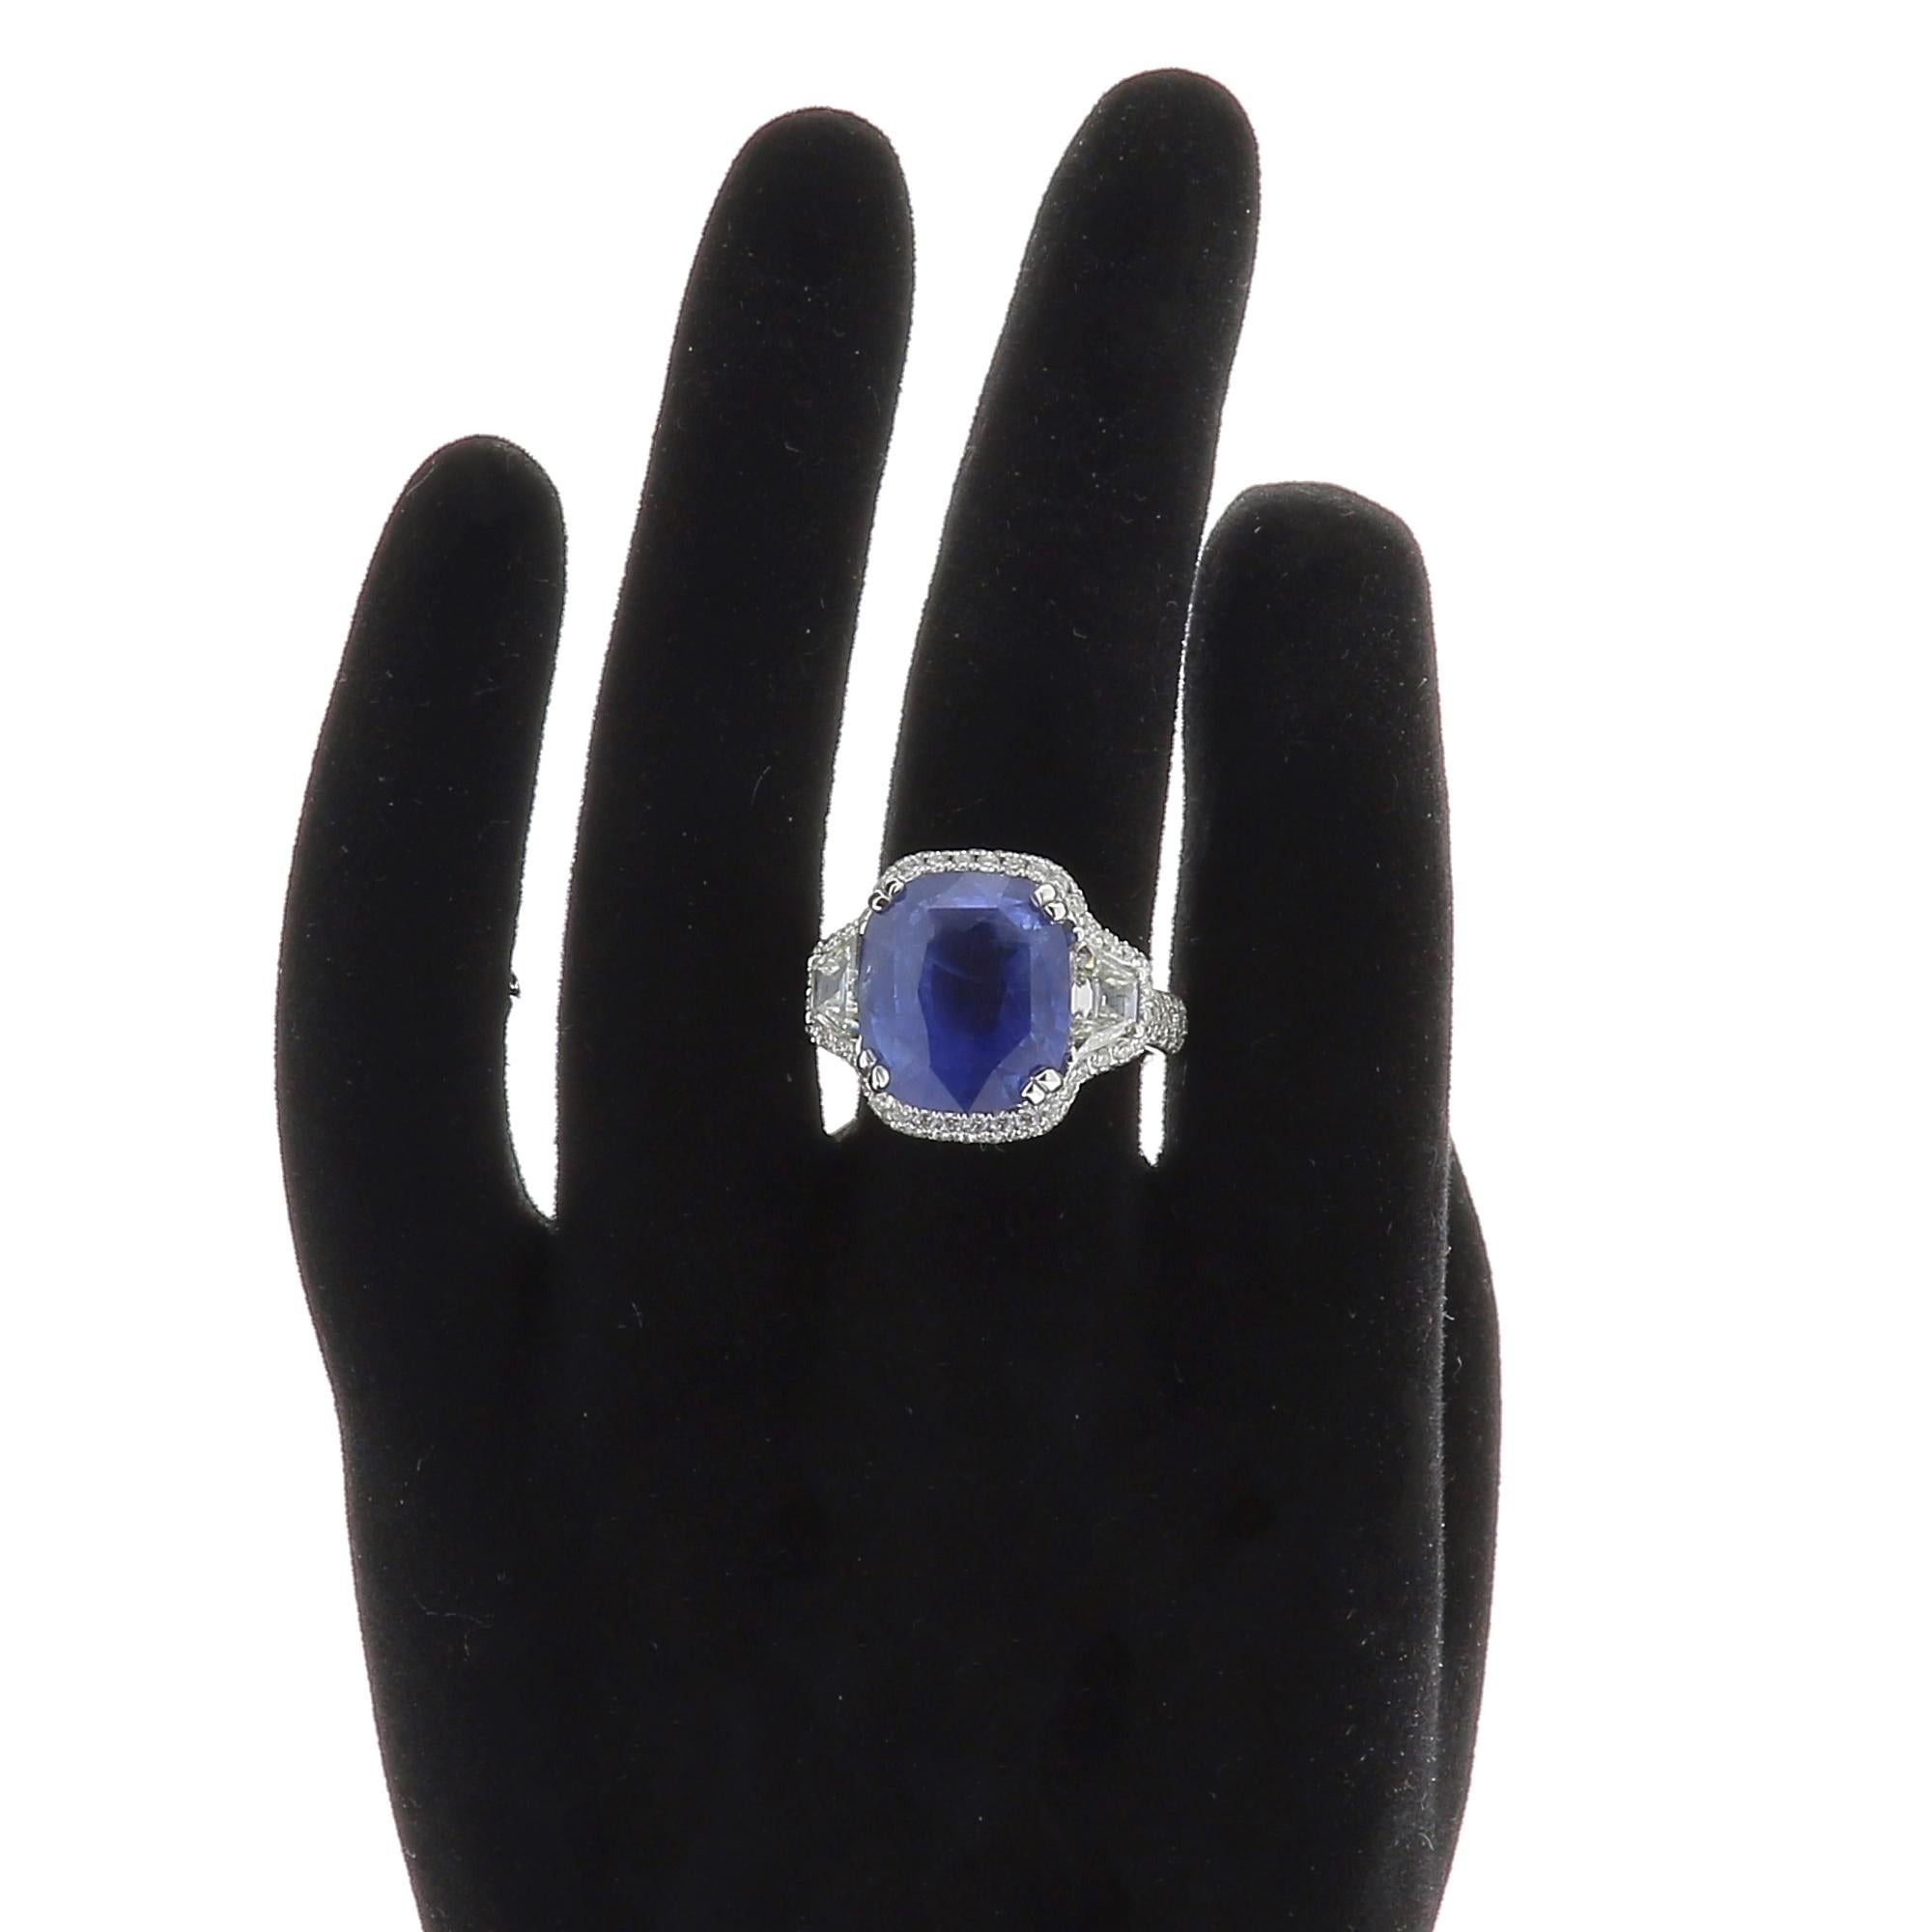 An amazing Cushion Ceylon Sapphire Ring, flanked on each side by a single Trapezoid Diamond and surround with an halo of Diamond weighing 0.93 Carats.
The total weight of the Ceylon Sapphire is 11.85 Carats.
The Diamonds Trapezoids weight is 0.75